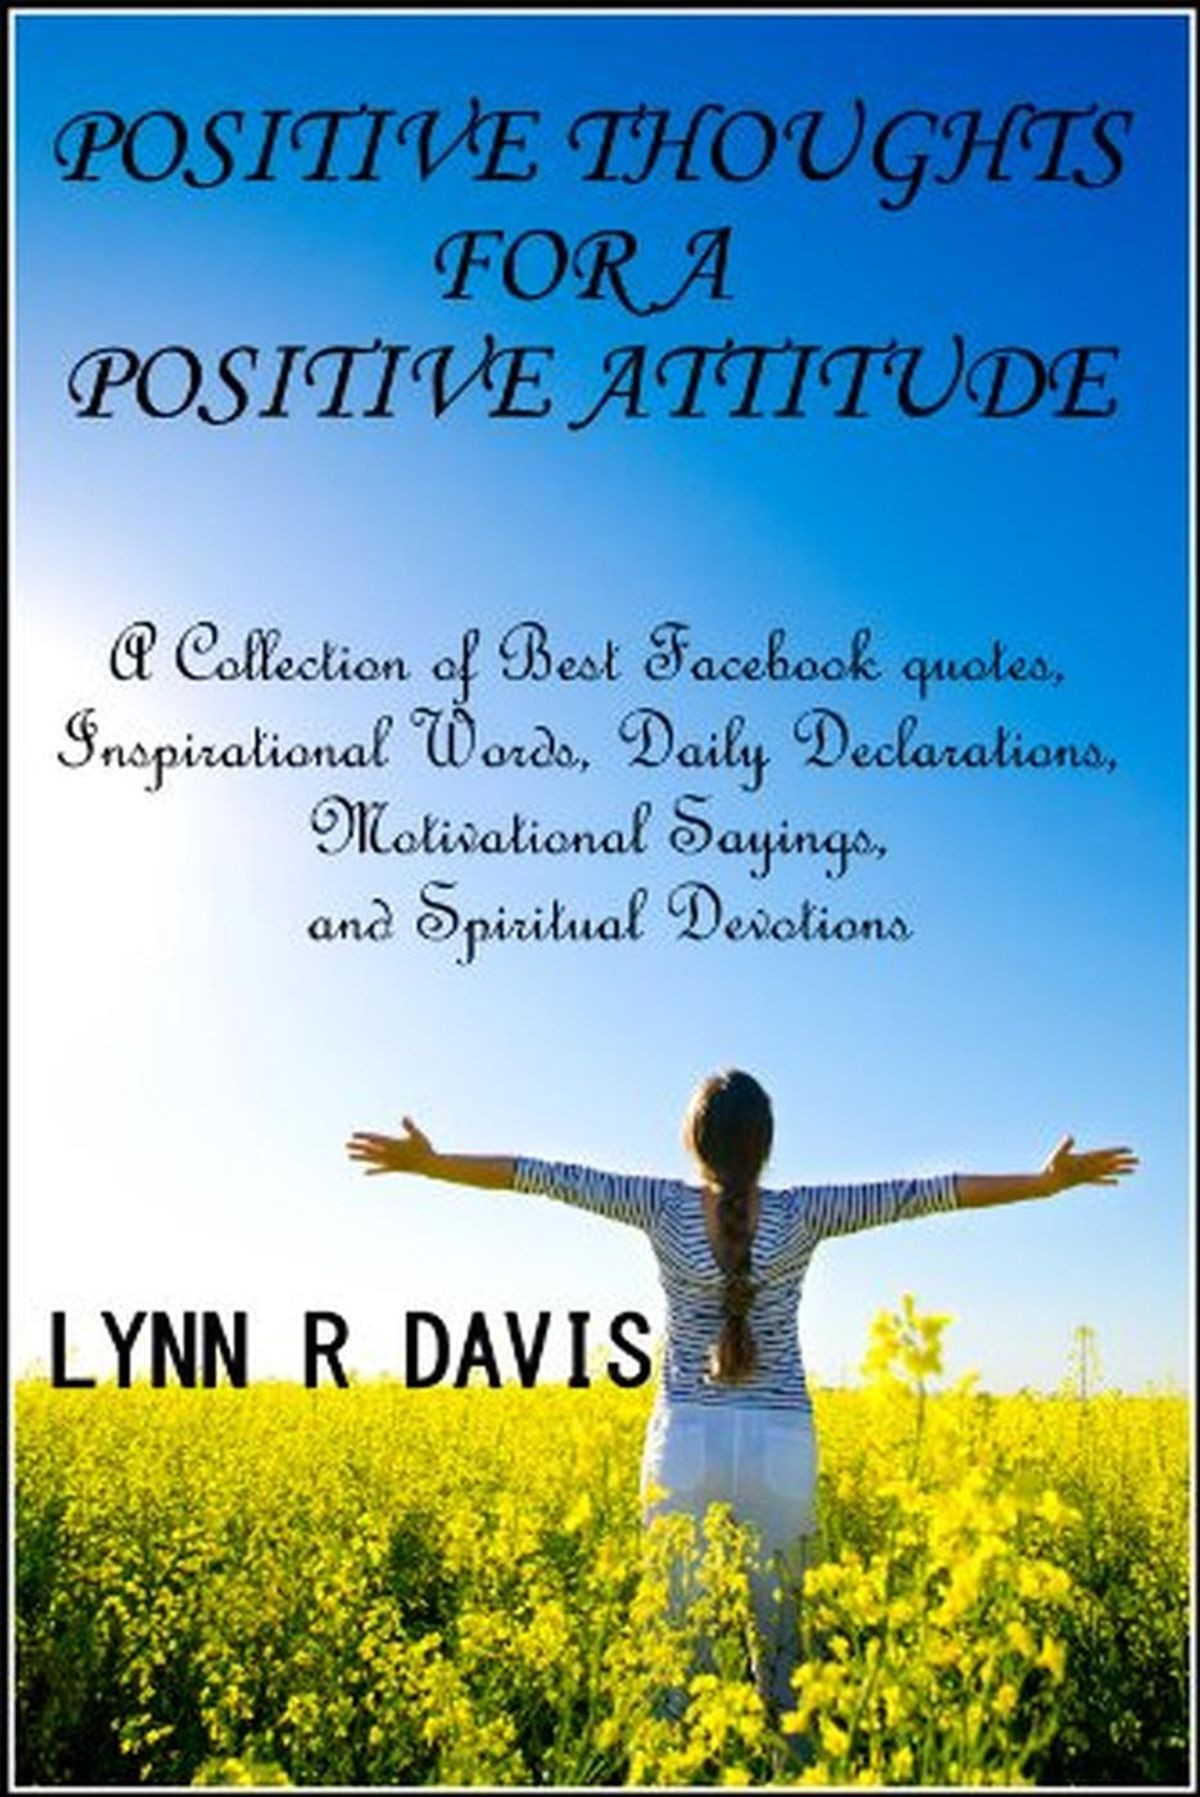 Quotes About Positive Attitude
 Positive Thoughts For A Positive Attitude A Collection of